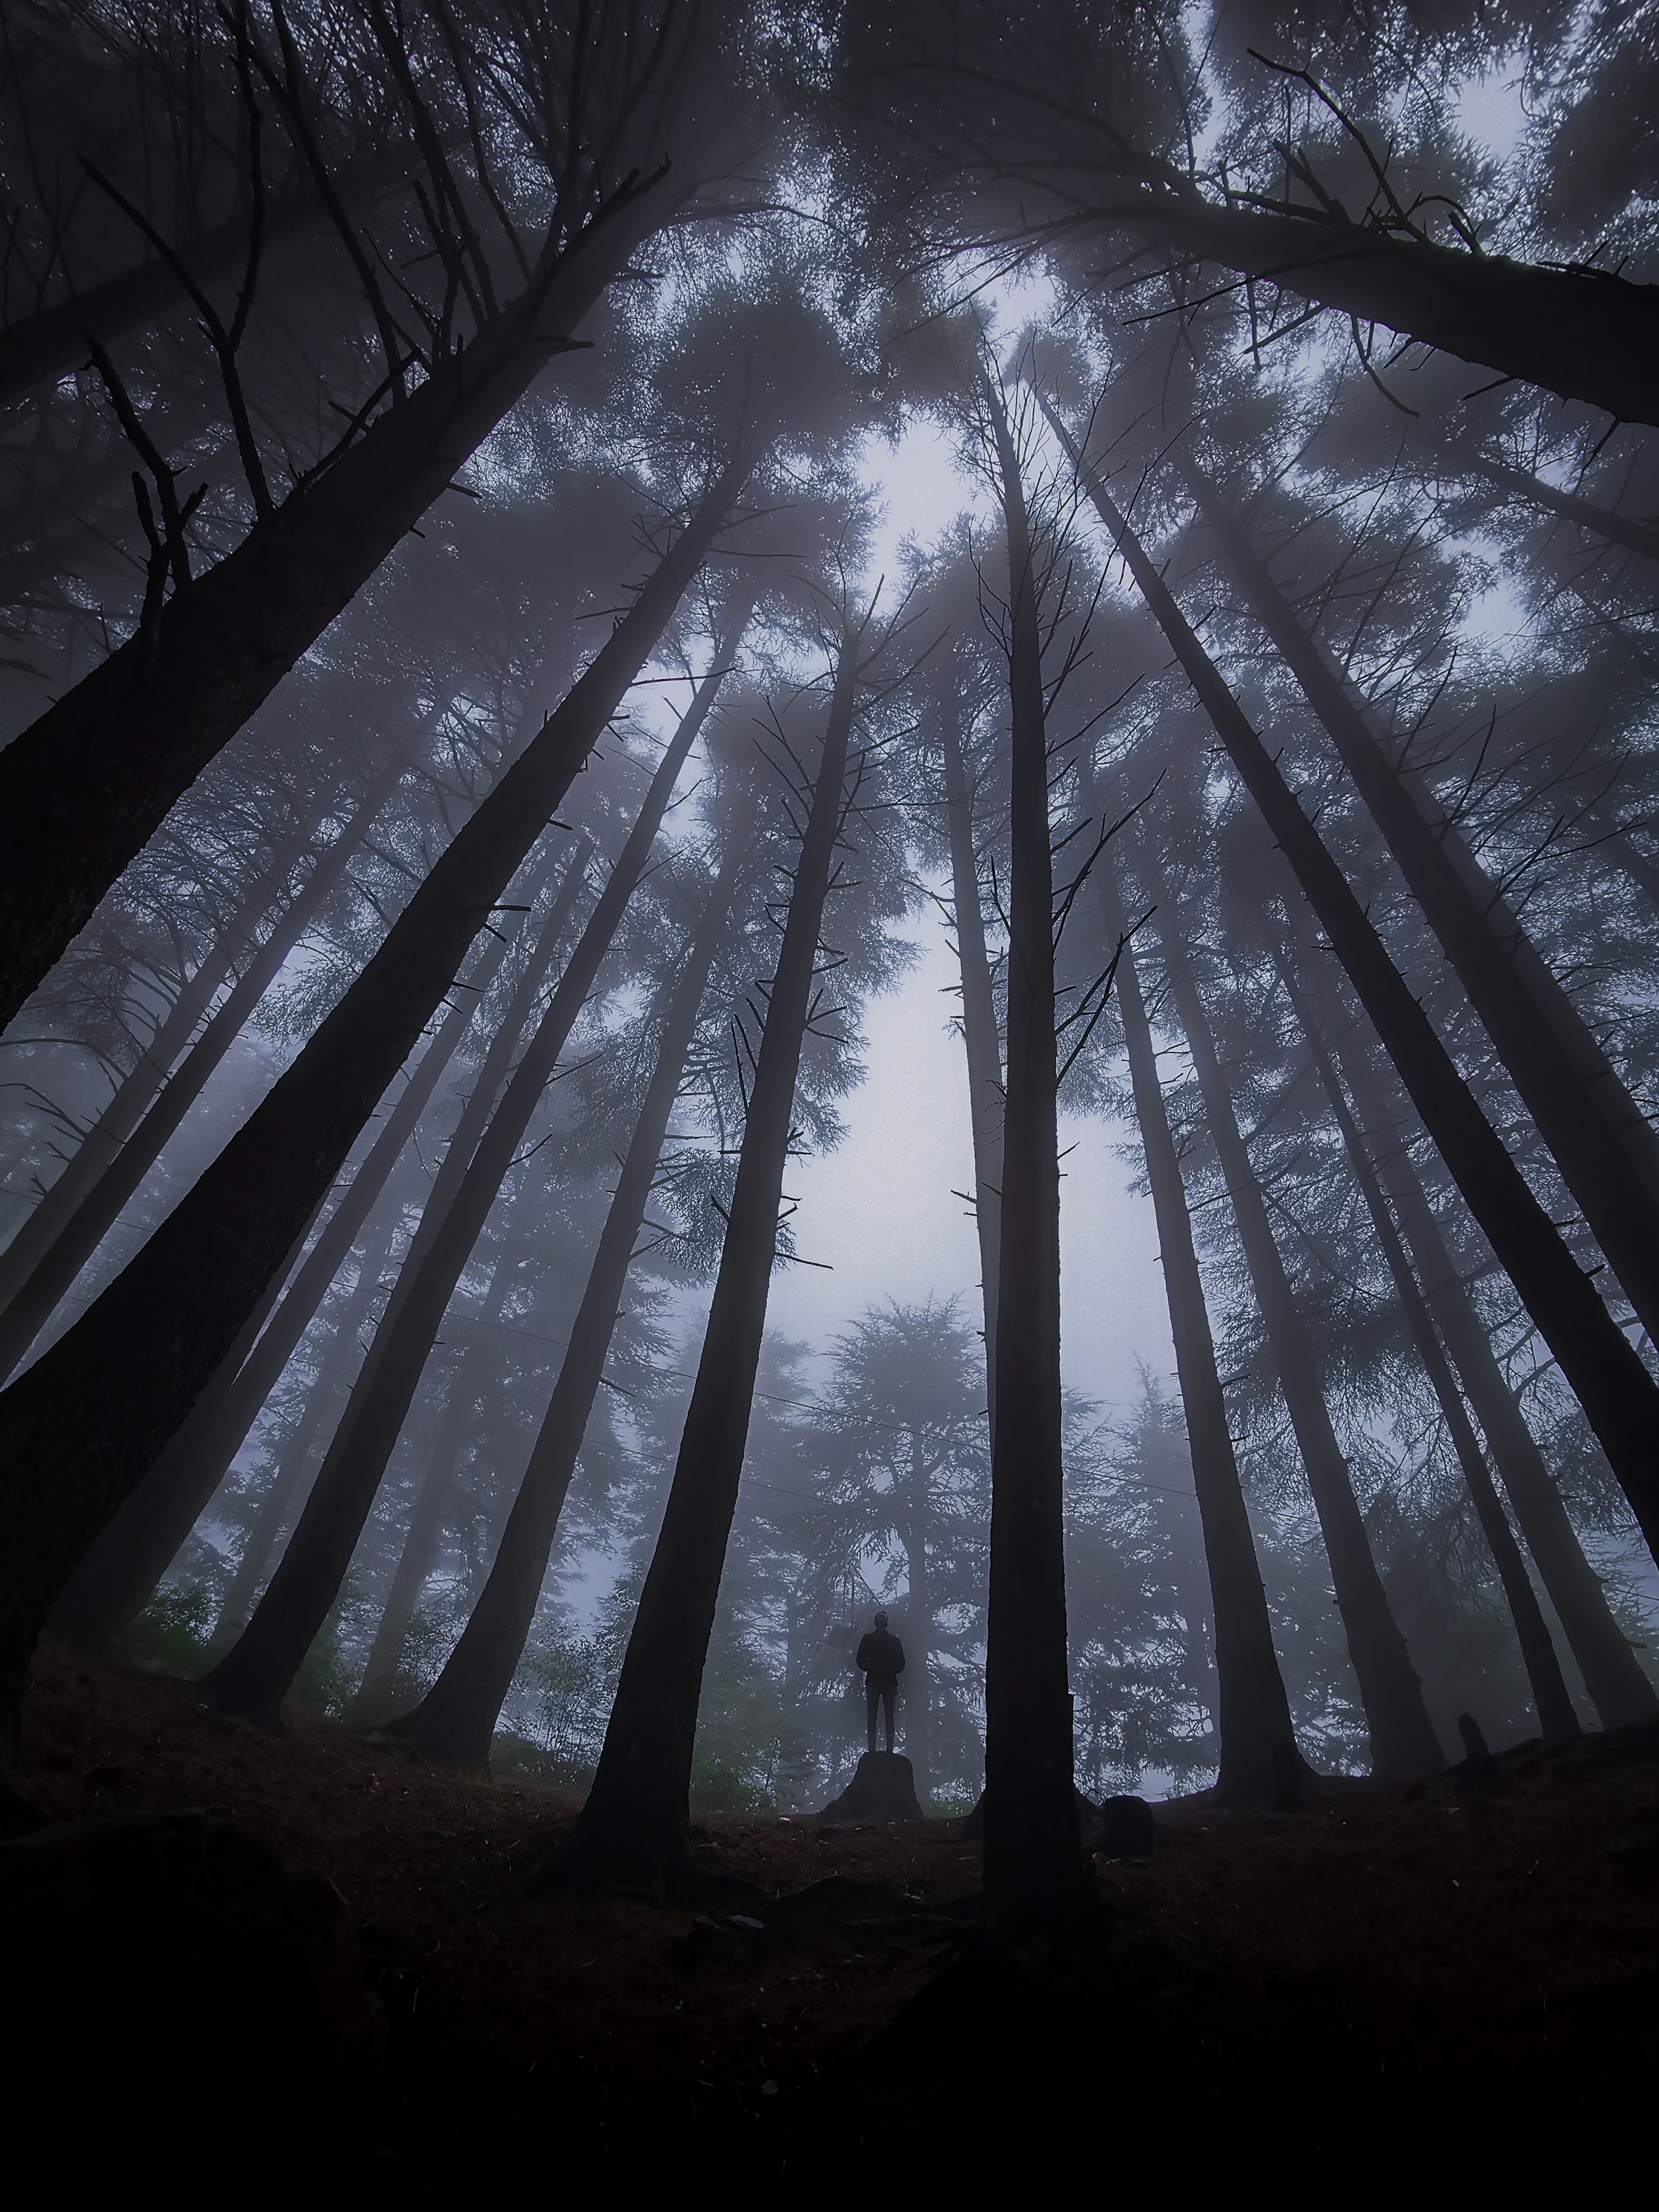 lonely, darkness, alone, miscellanea, miscellaneous, forest, fog, loneliness